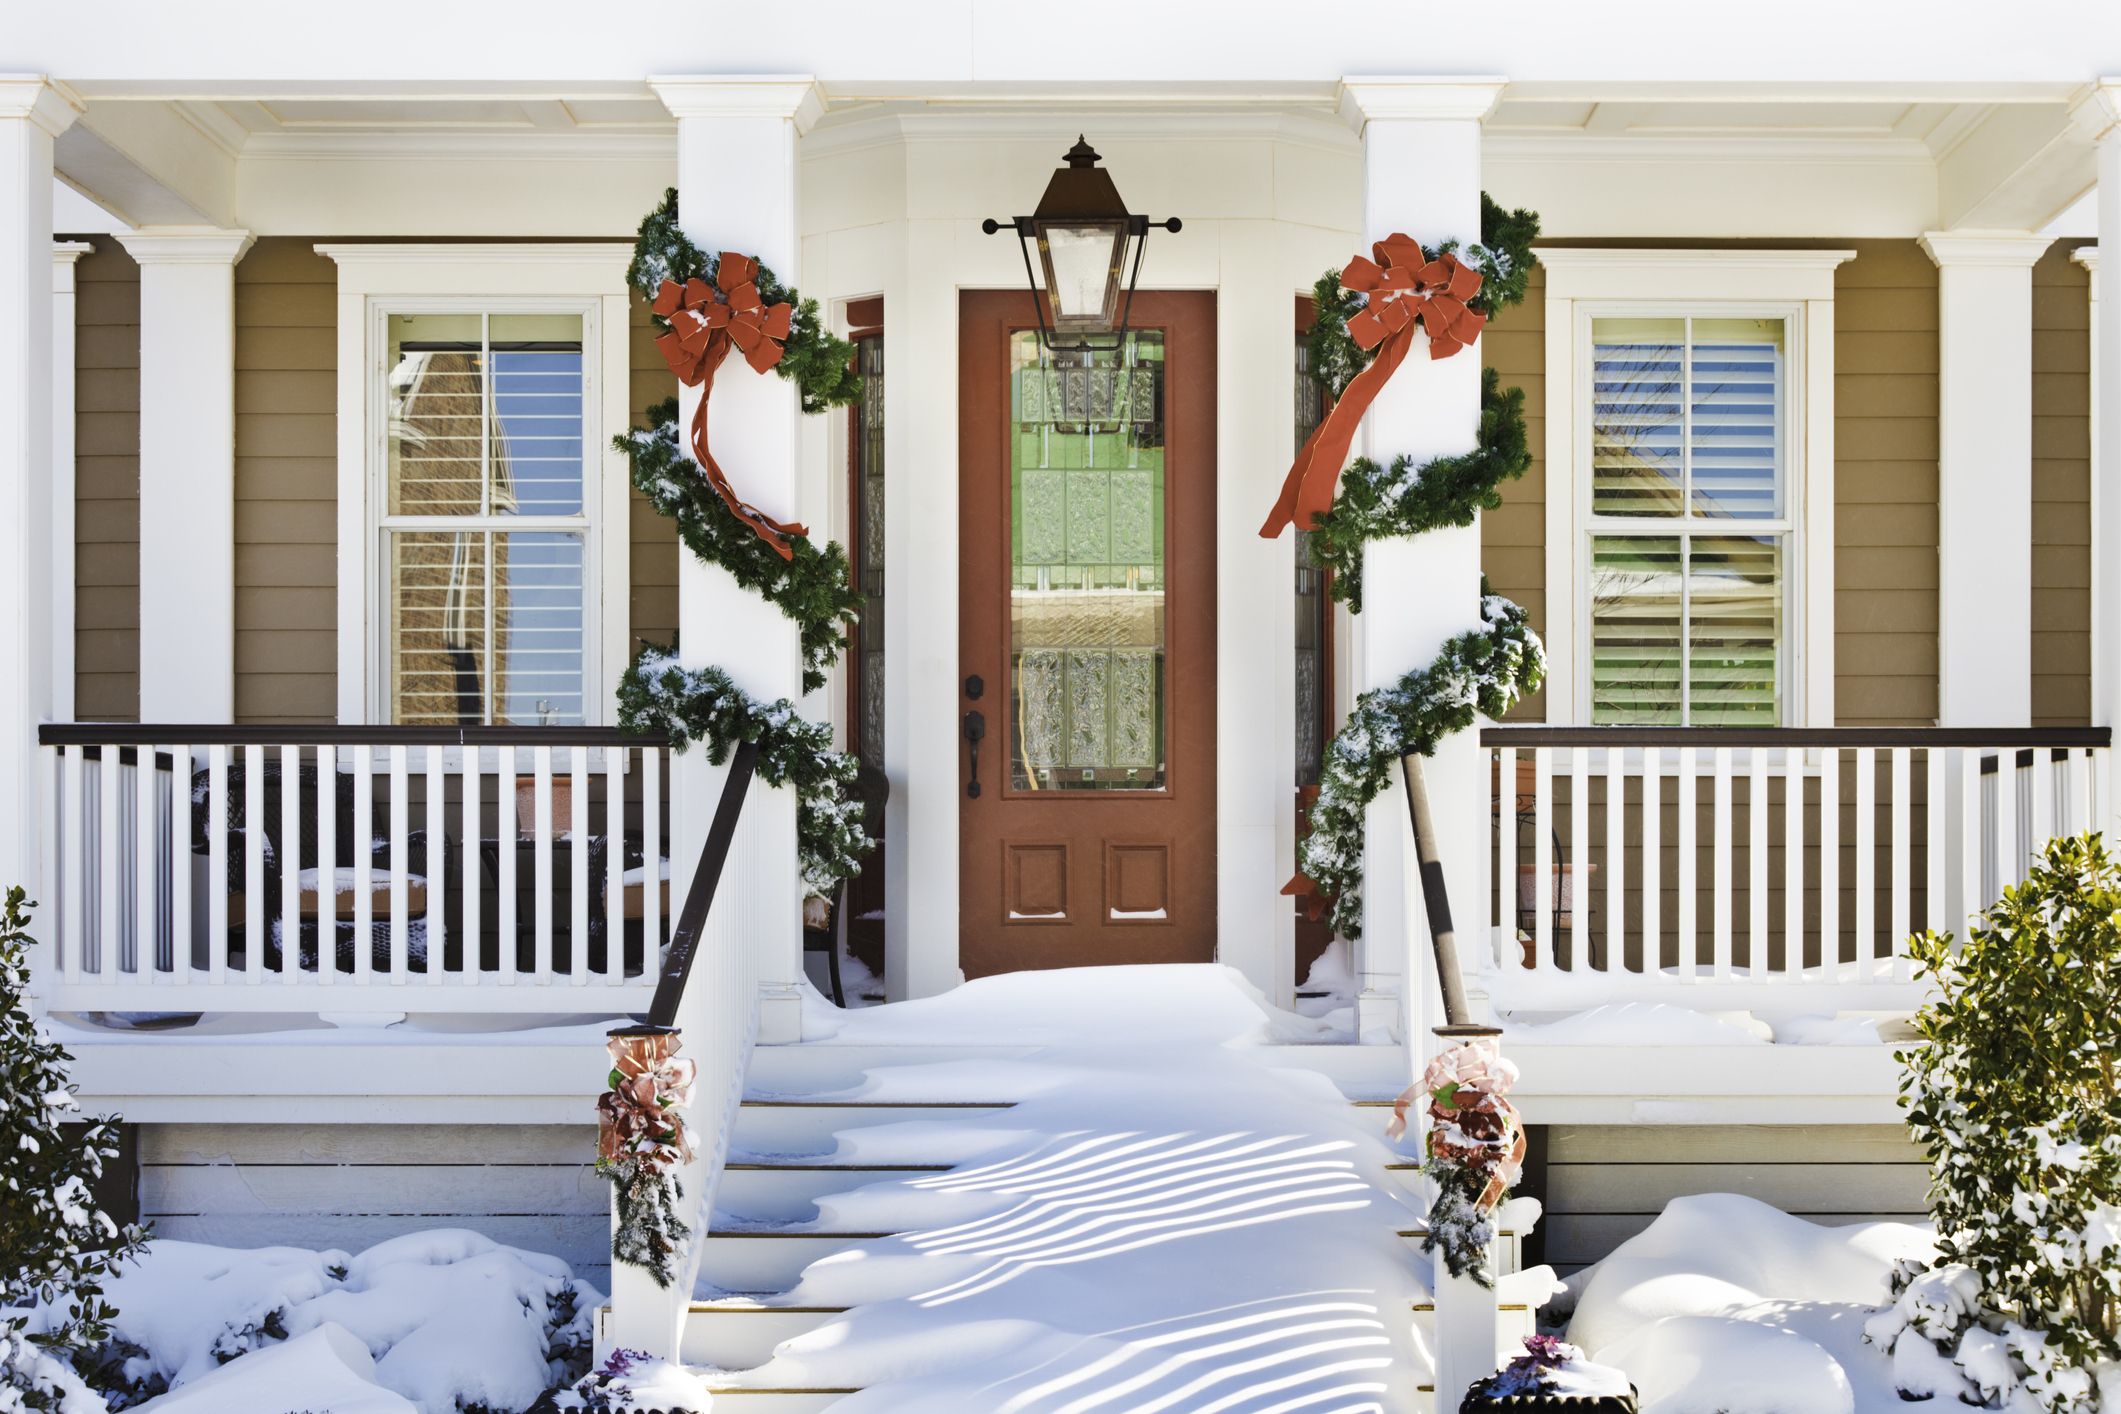 Inviting Christmas Front Doorway With Snow On Porch Royalty Free Image 1692027101 